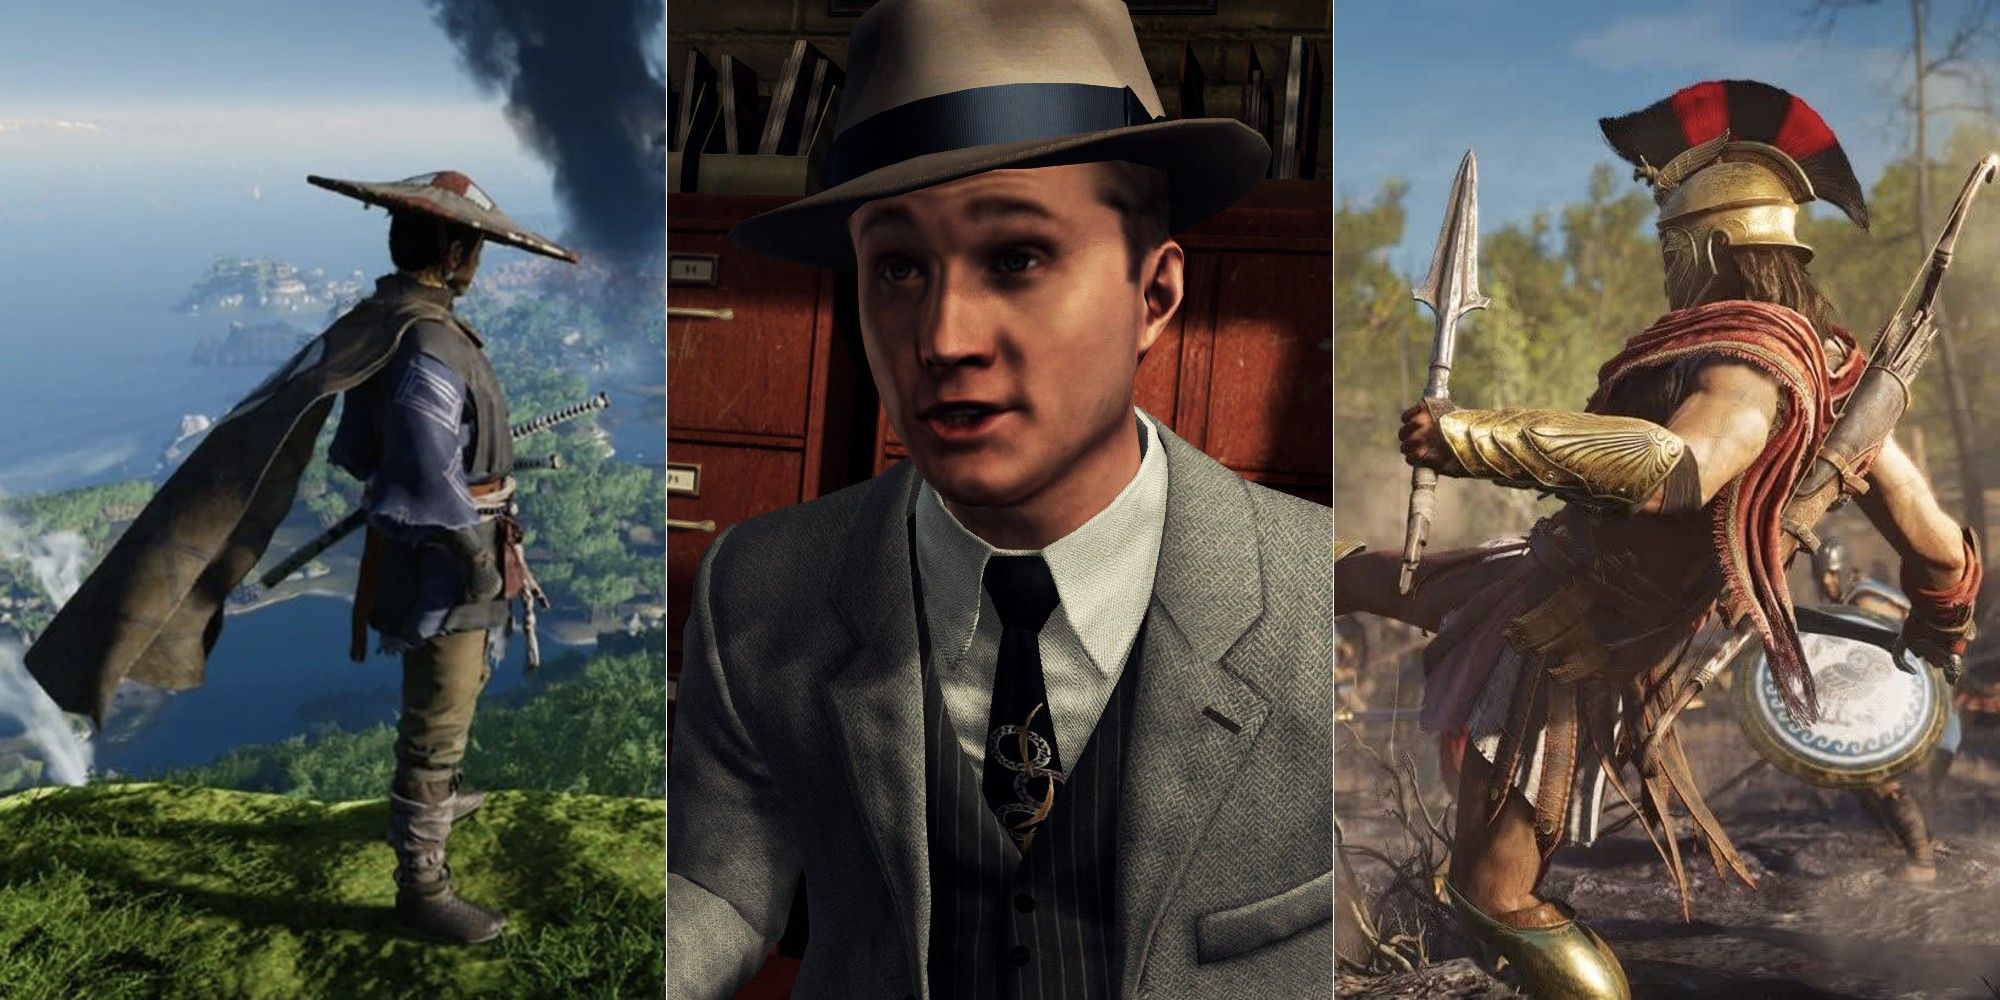 Protagonists from Ghost of Tsushima, LA Noire, and Assassin's Creed Odyssey split image